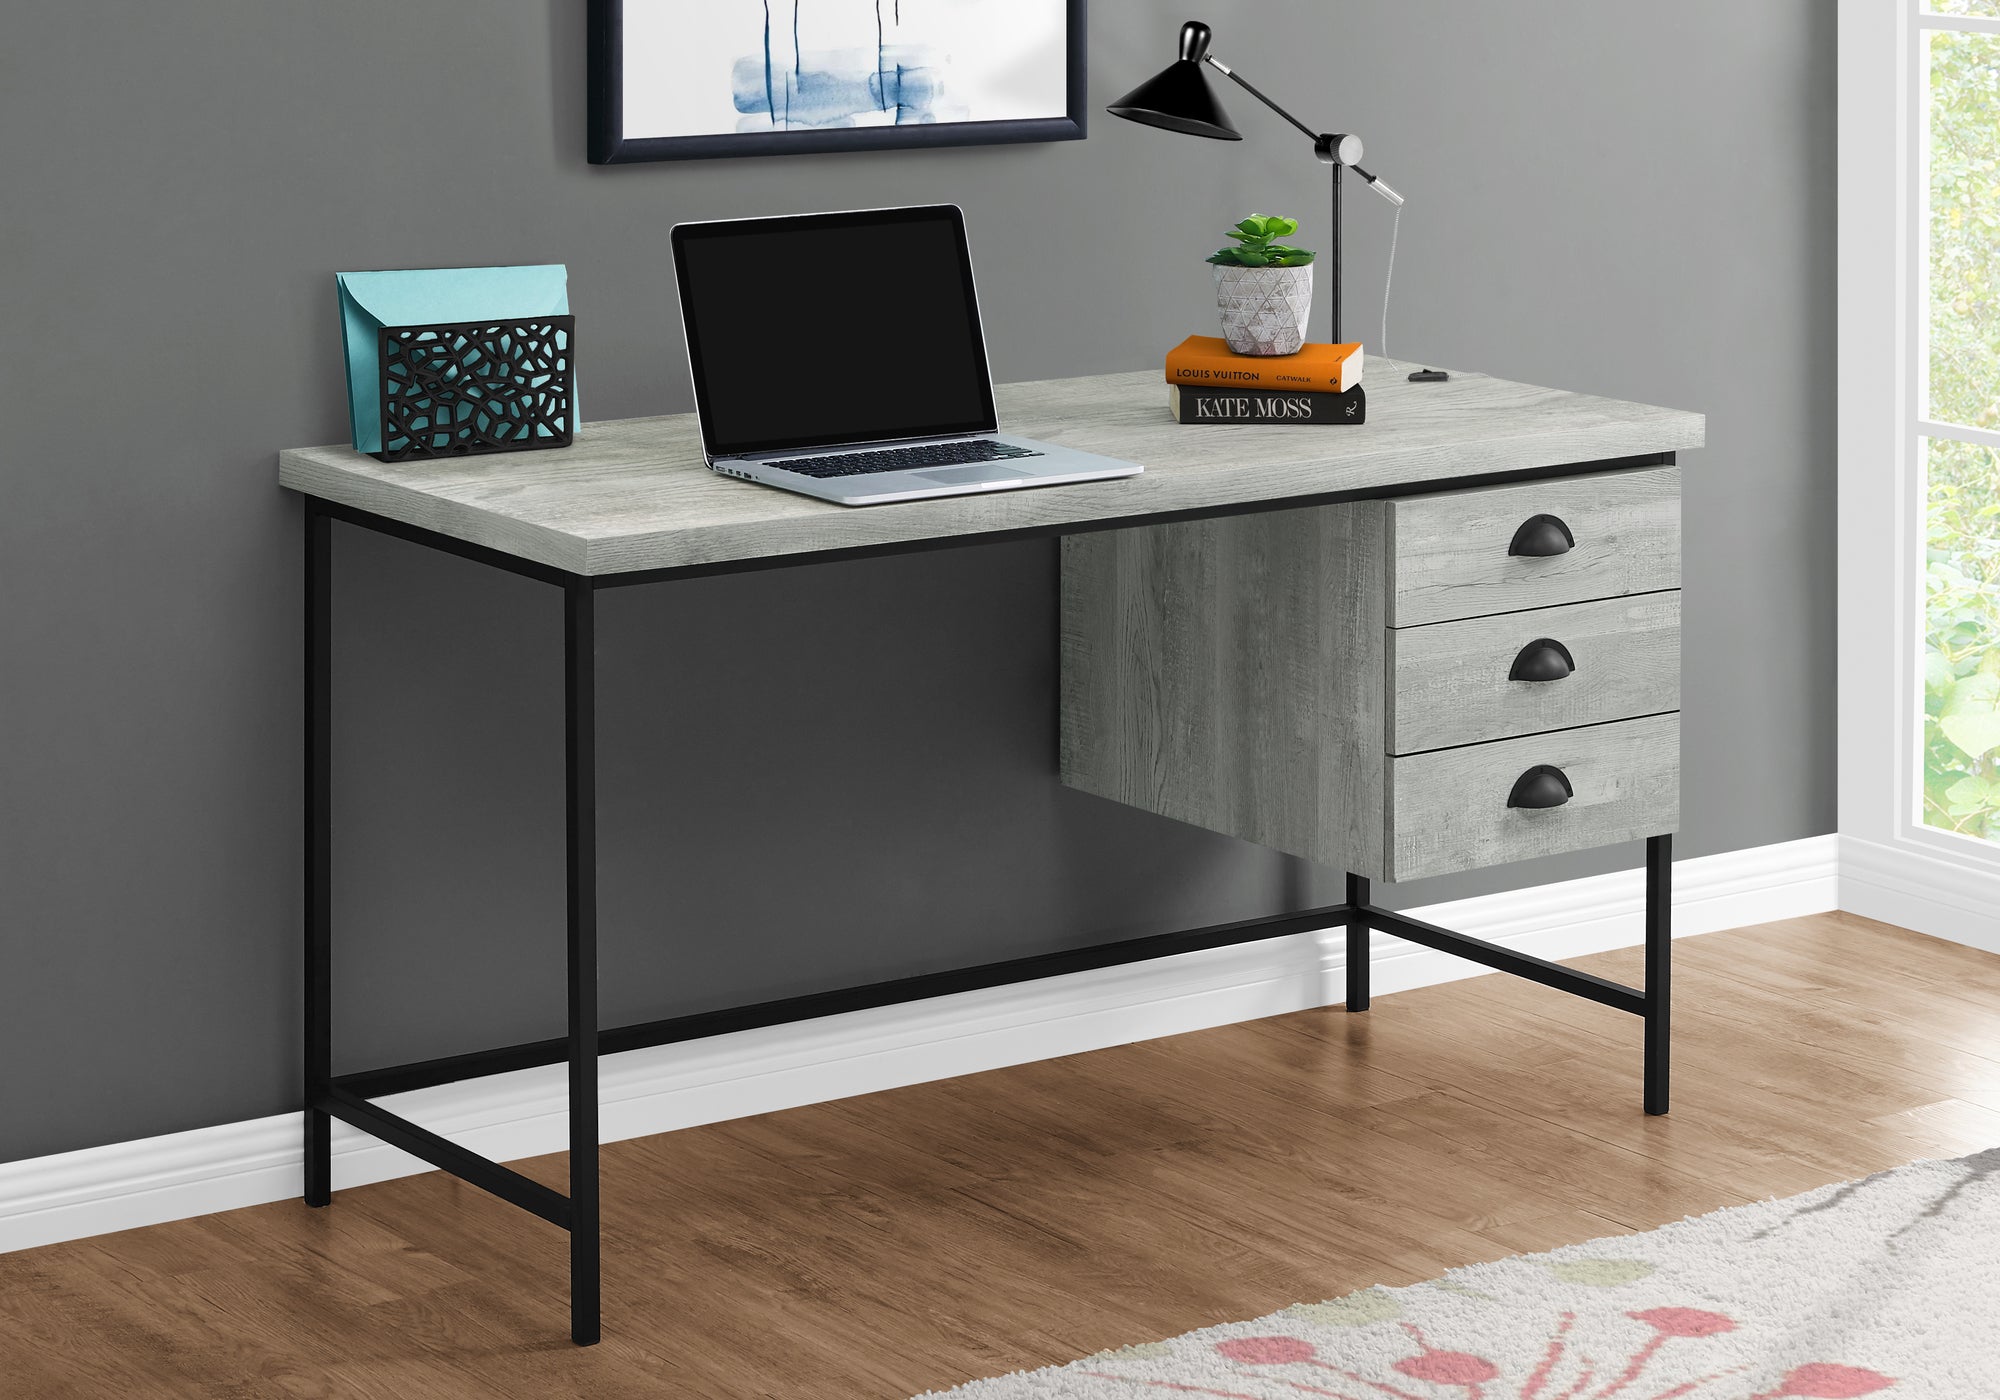 MN-387486    Computer Desk, Home Office, Laptop, Storage Drawers, 55"L, Metal, Laminate, Grey Reclaimed Wood Look, Black, Contemporary, Modern